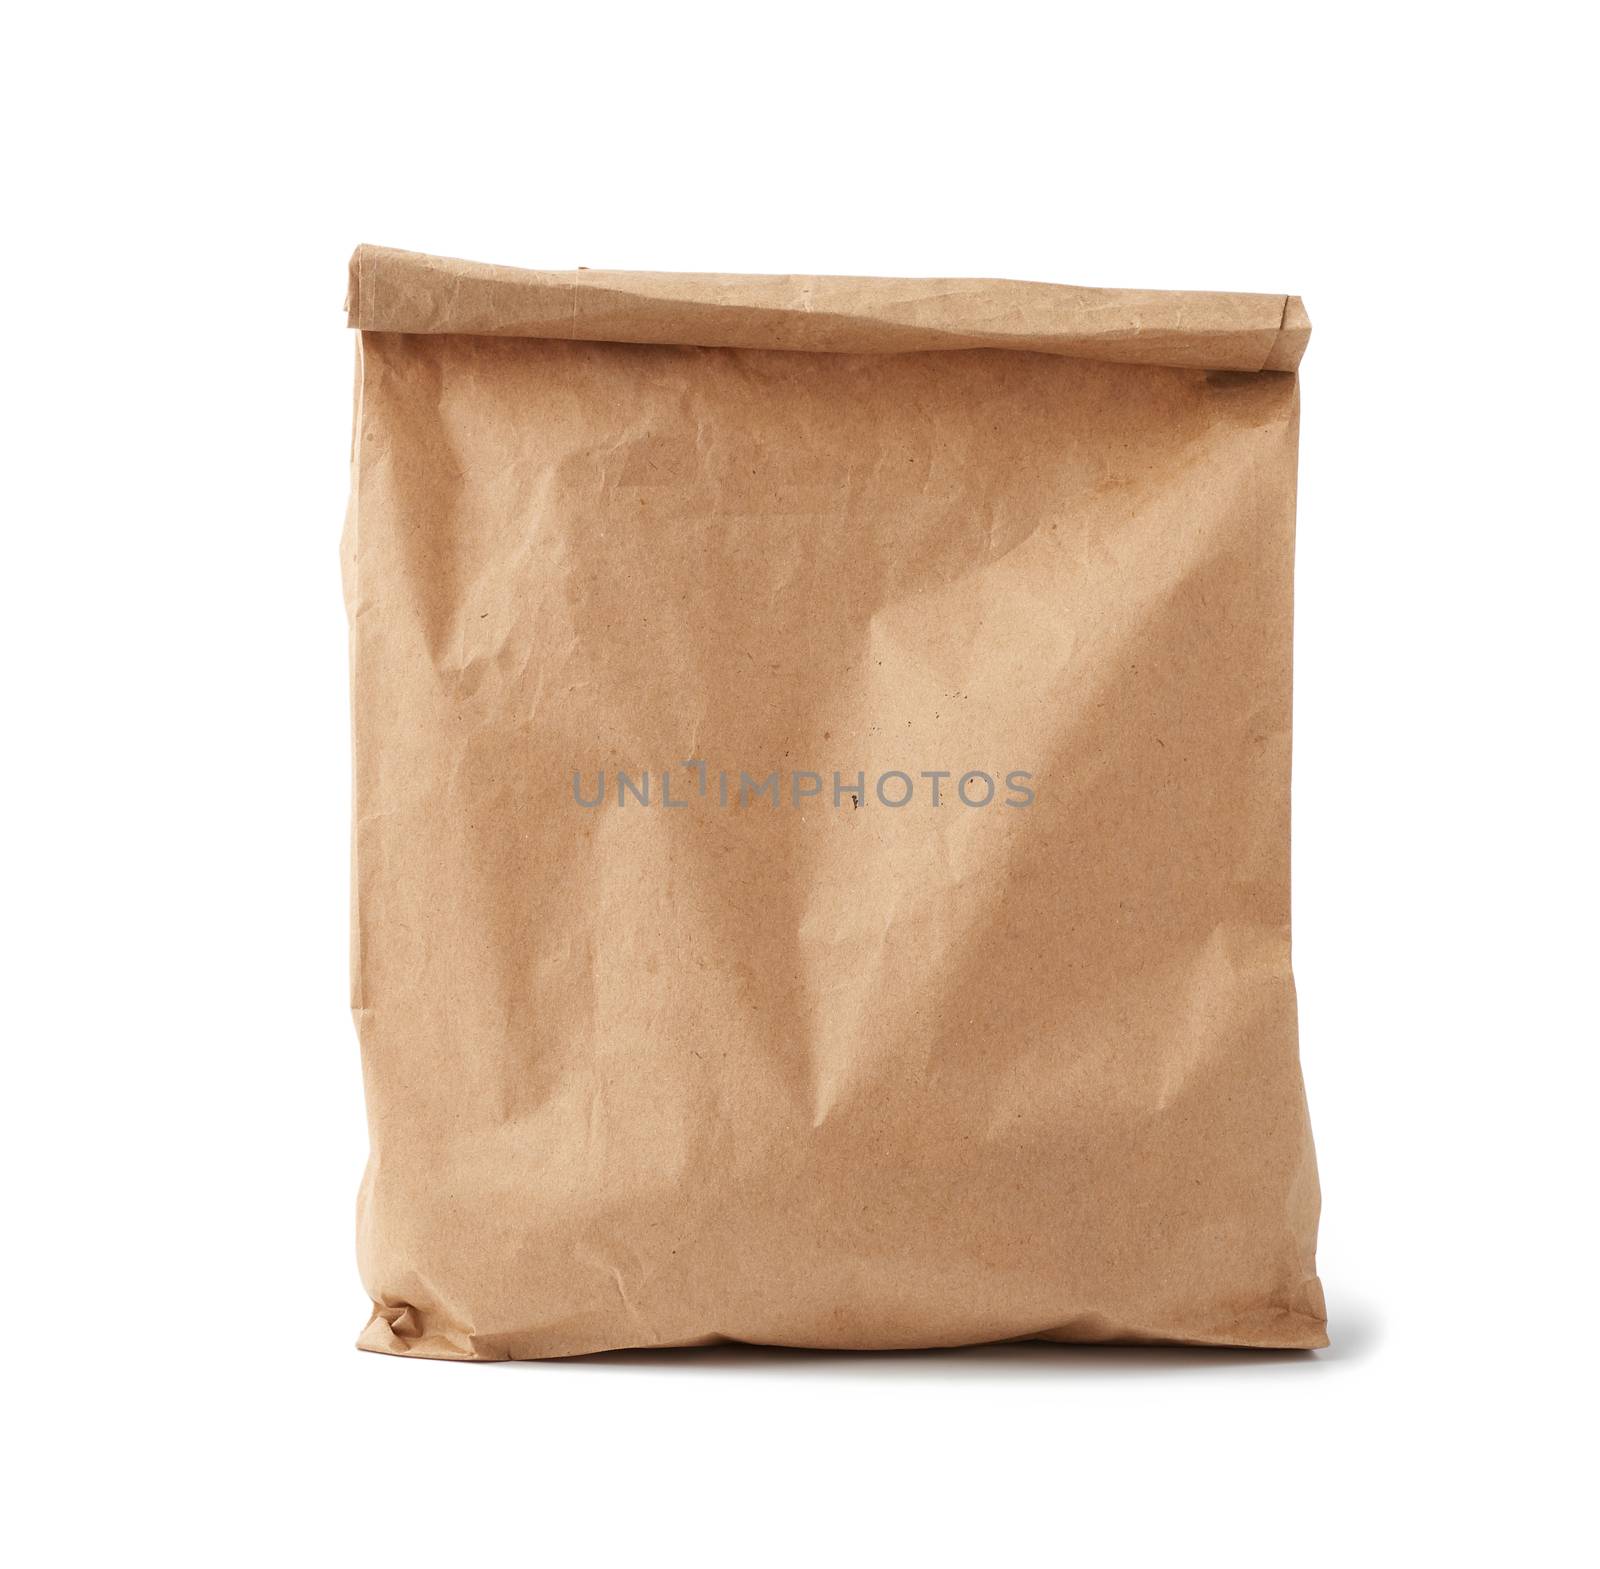 full paper disposable bag of brown kraft paper isolated on white background, concept of rejection of plastic packaging, template for designer, packaging for contactless product delivery